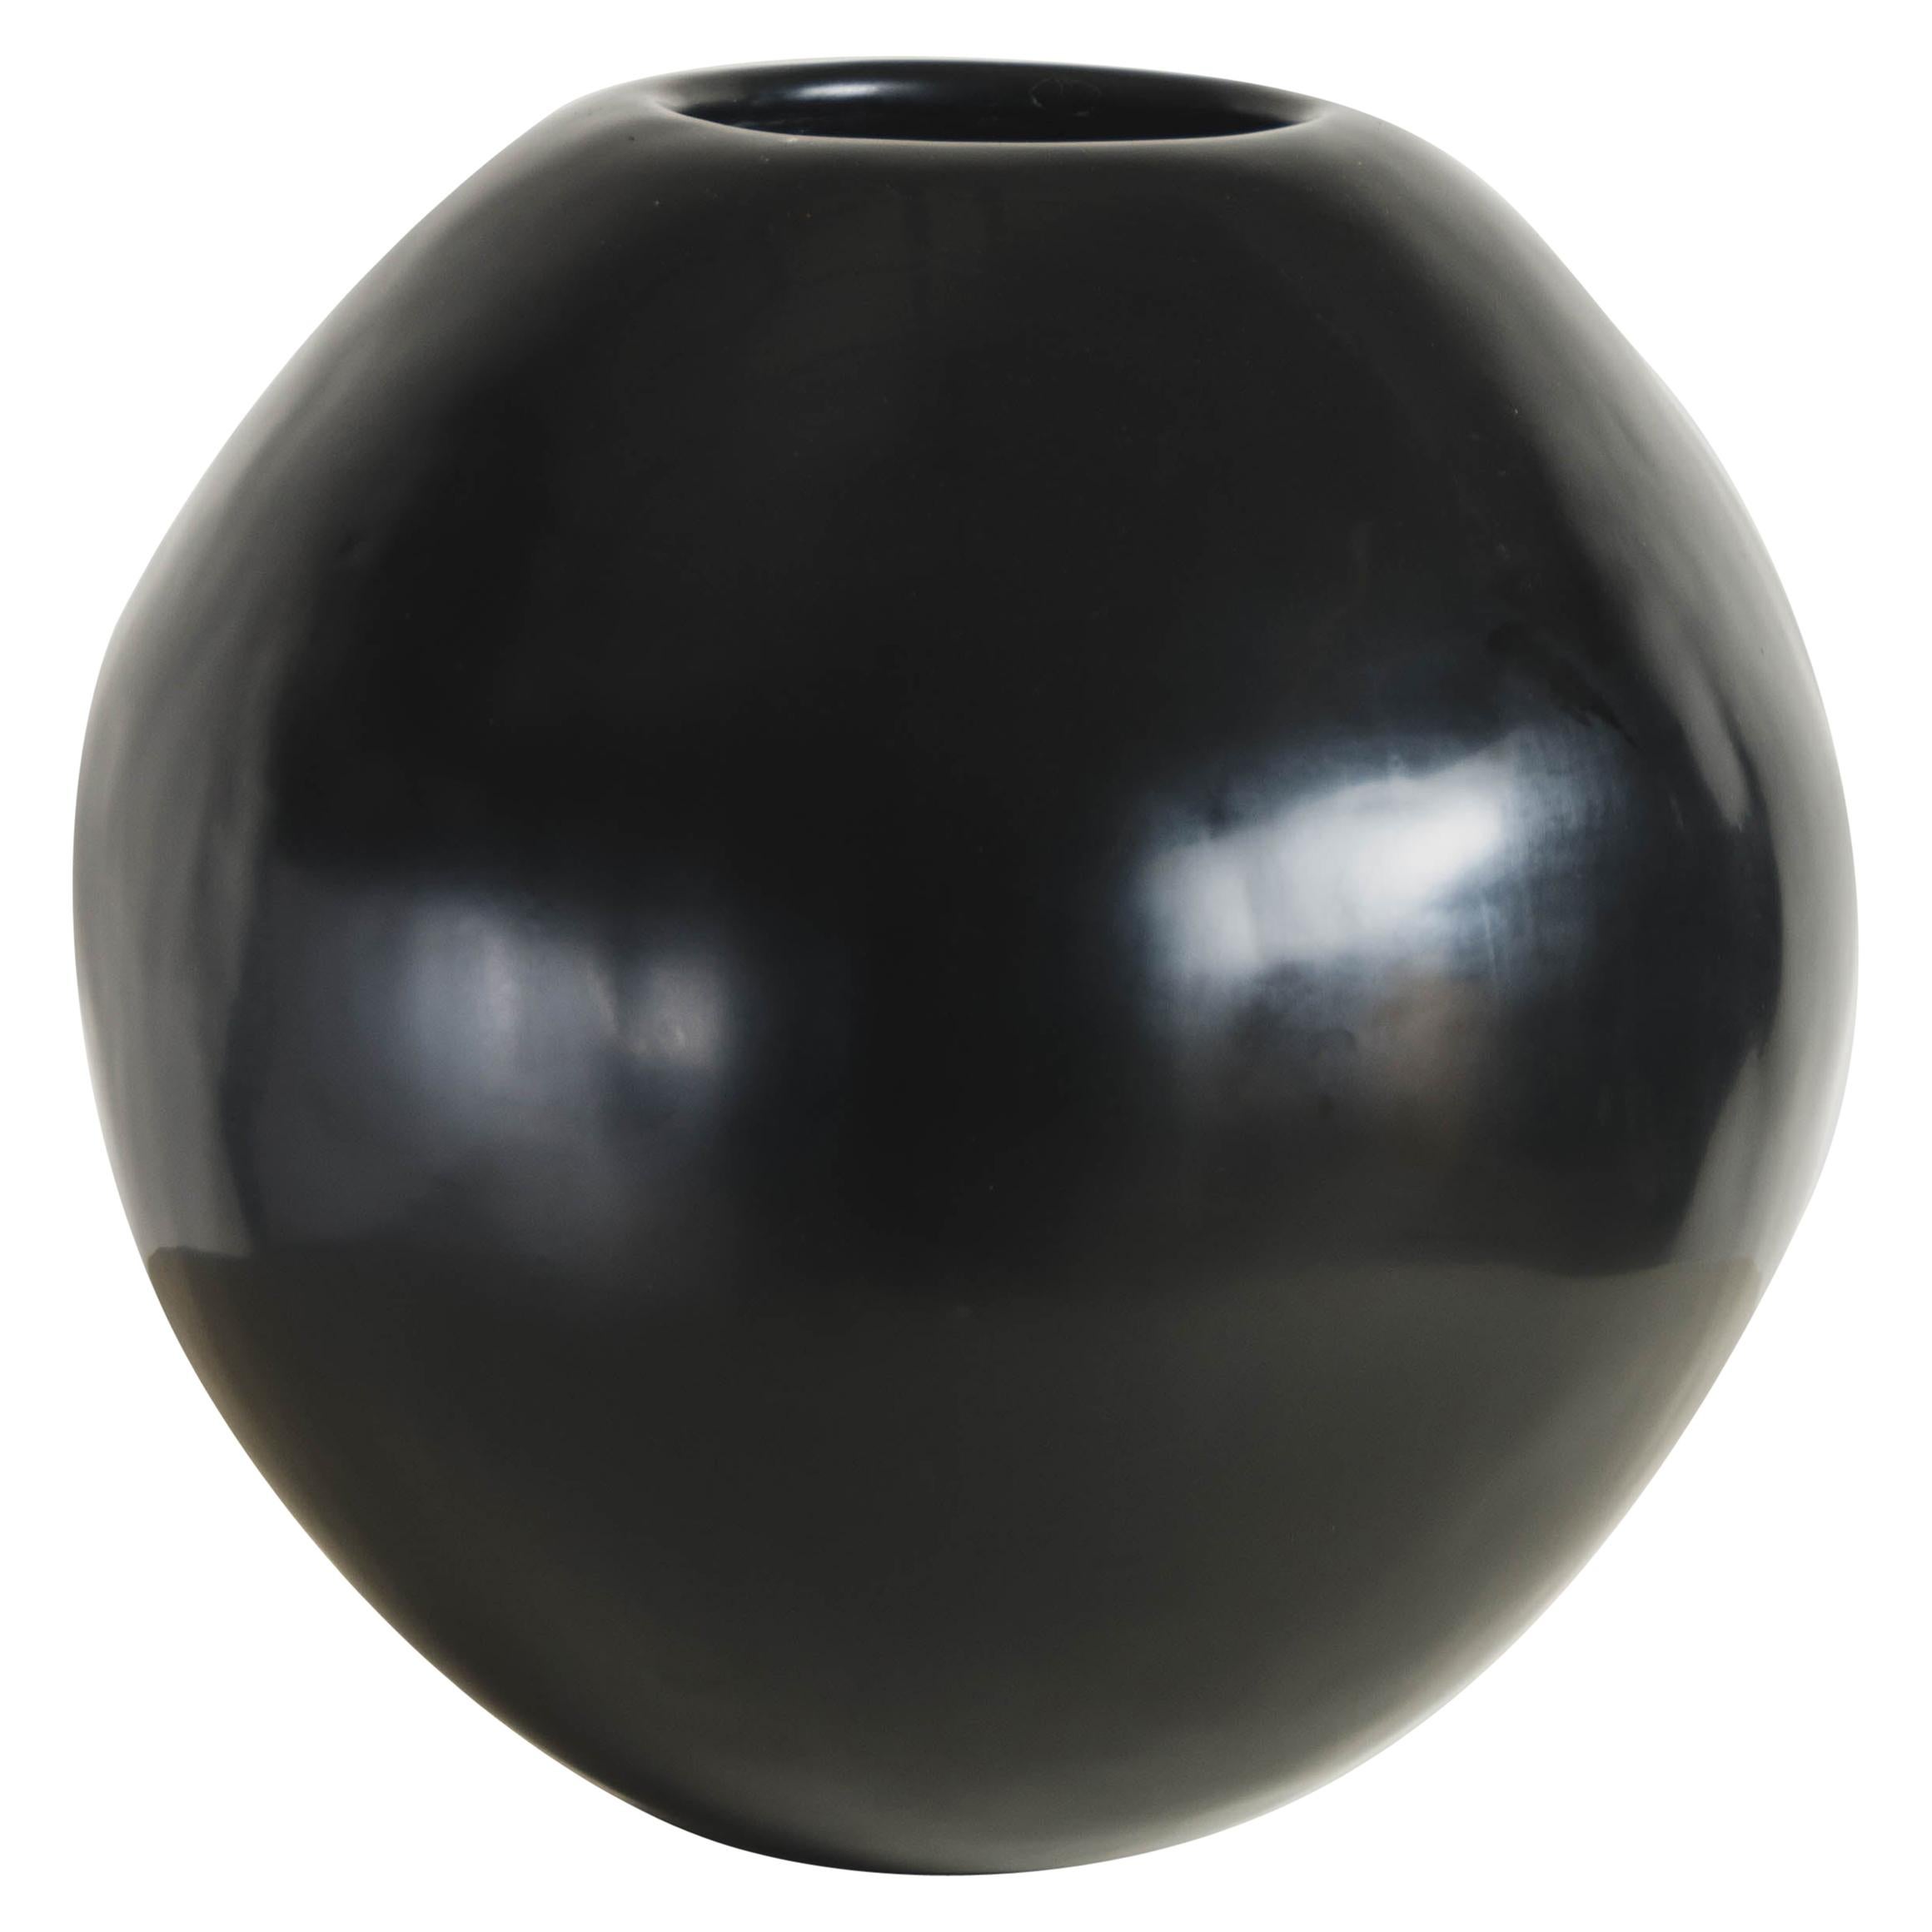 Full Moon Jar in Black Lacquer by Robert kuo, Limited Edition For Sale